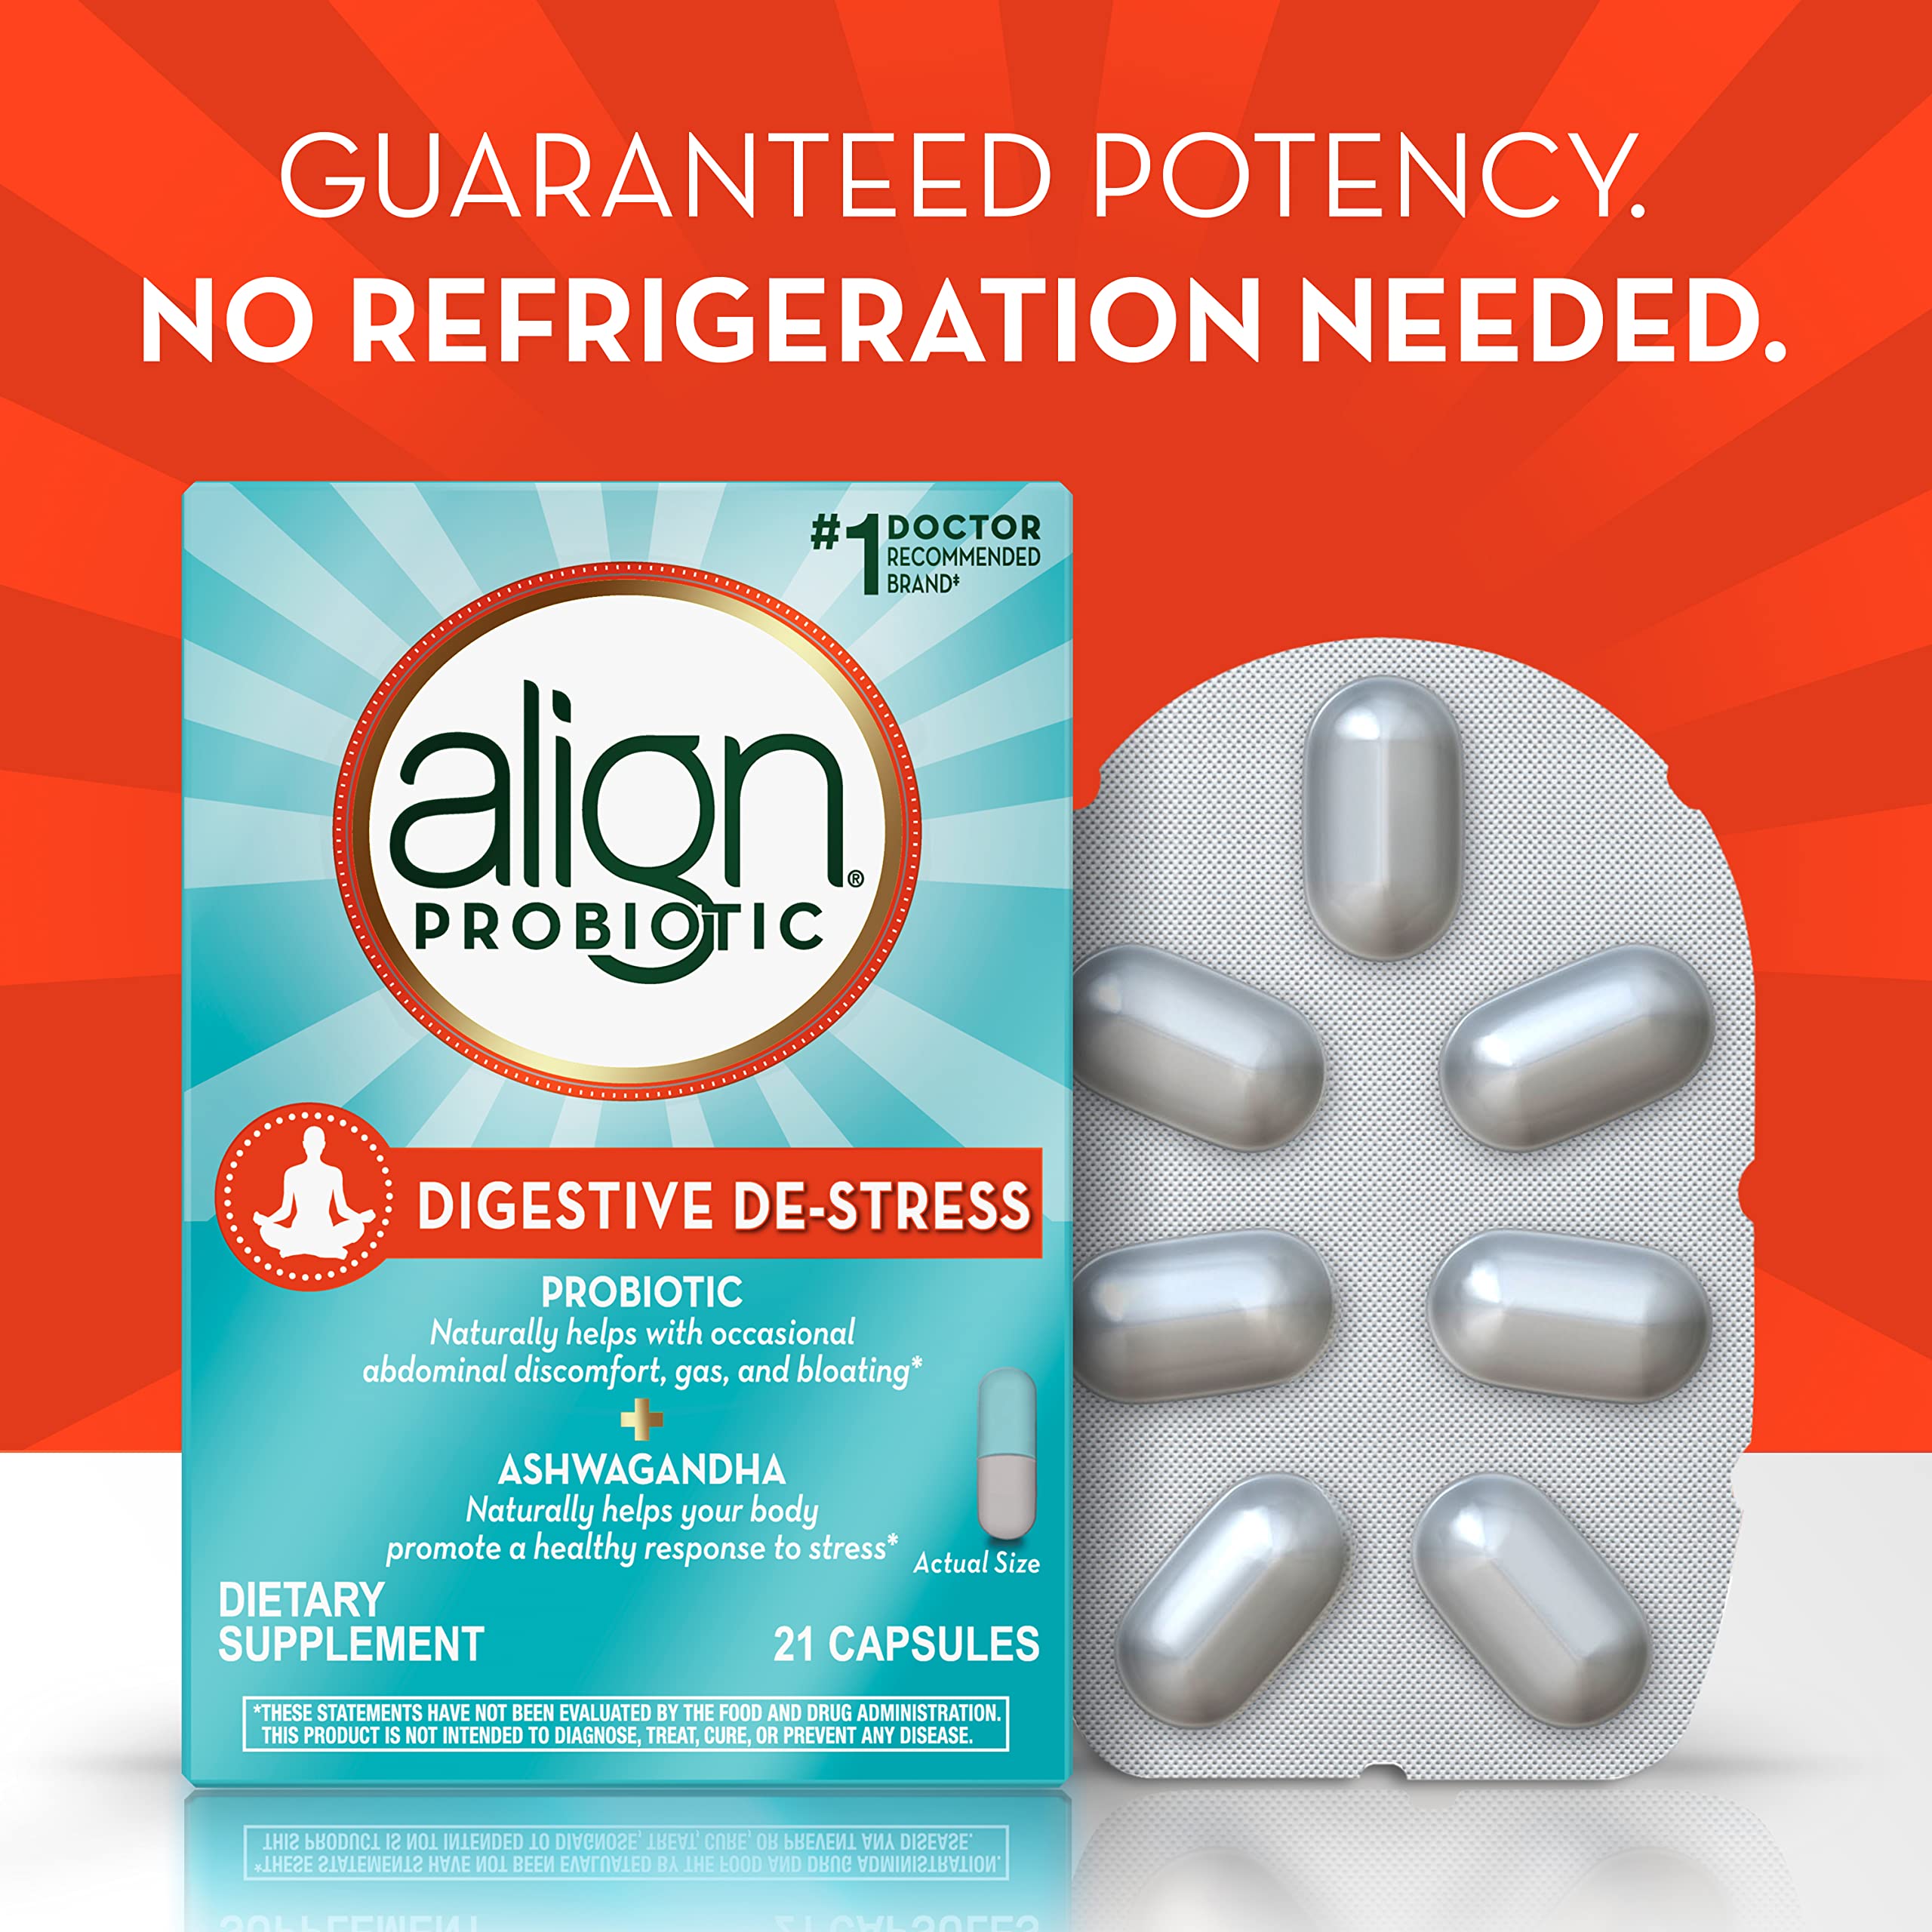 Align Probiotic, Digestive De-Stress, Probiotic for Women and Men with Ashwagandha, Helps with a Healthy Response to Stress, Gluten Free, Soy Free, Vegetarian, 21 Capsules (Pack of 2)